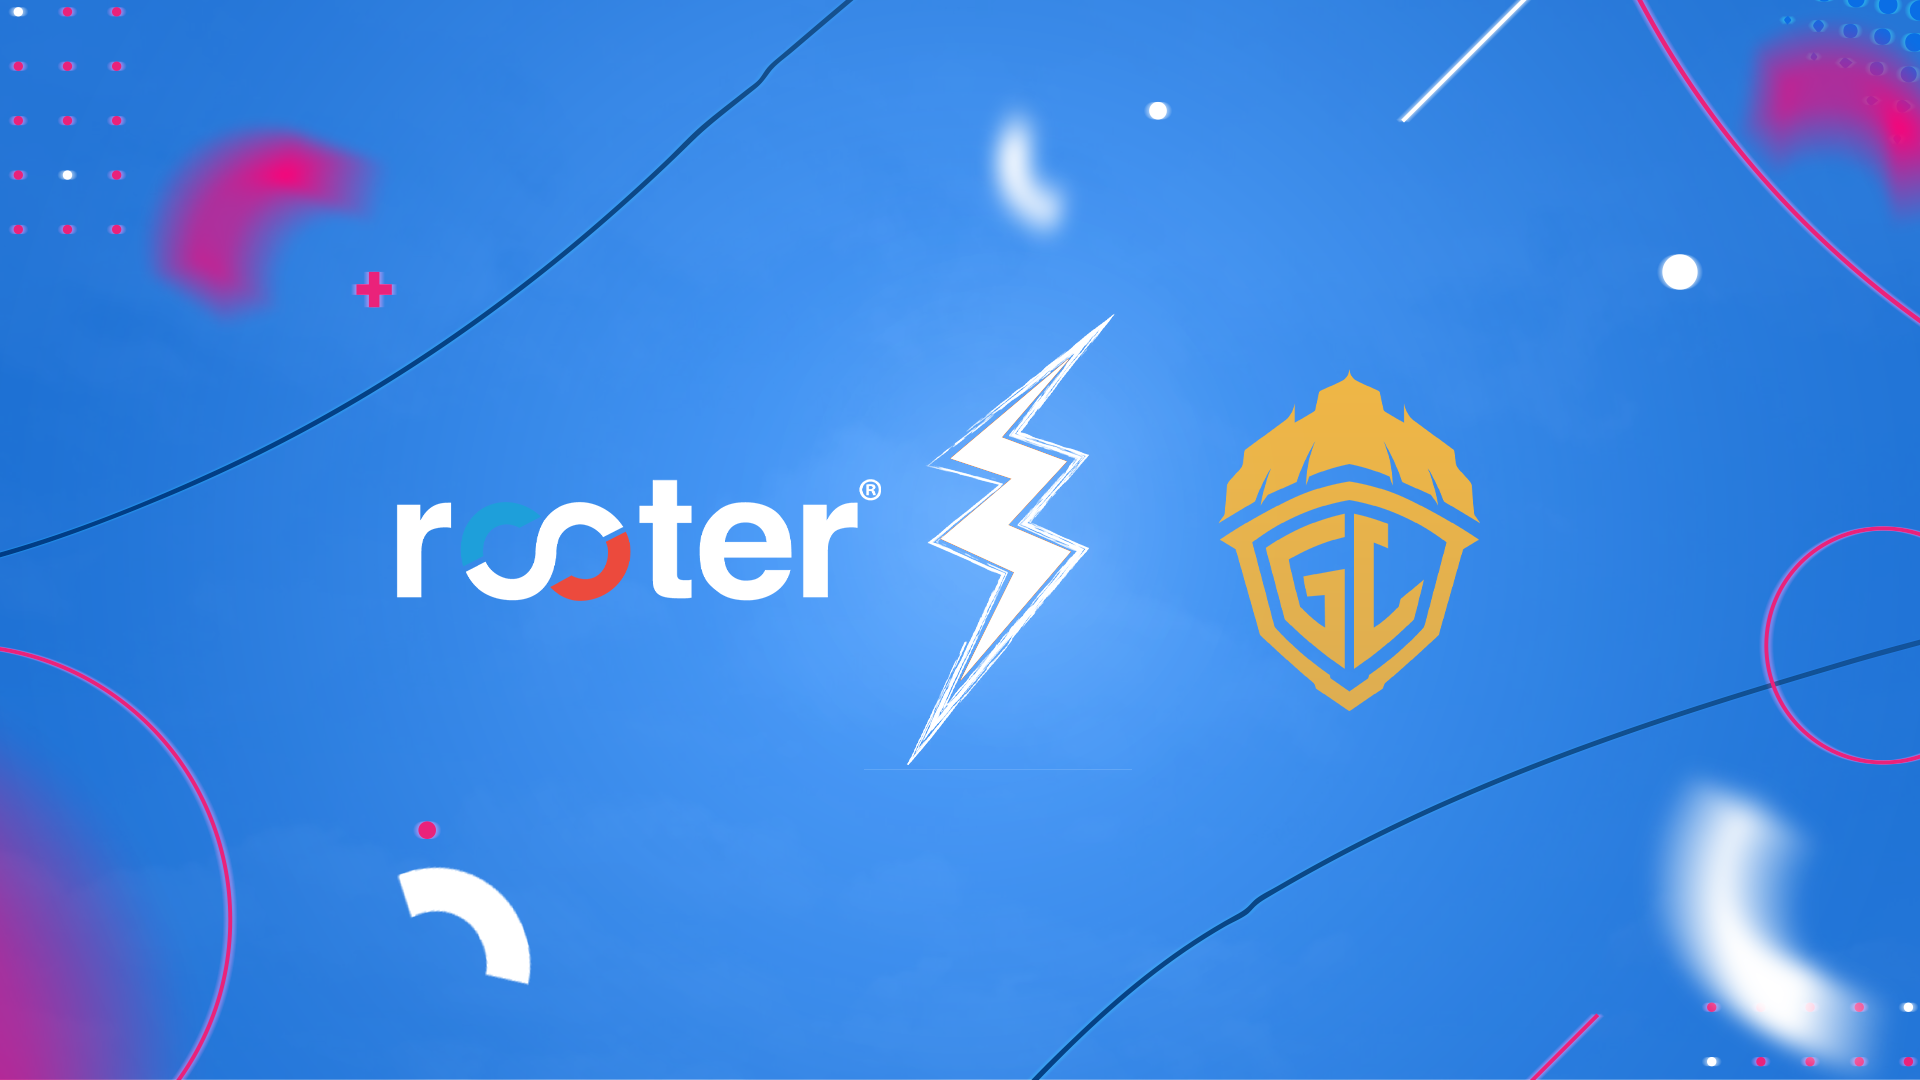 Rooter Signs Streaming Agreement With eSports Team GodLike; Plans 100 Cr Investment In Indian eSport